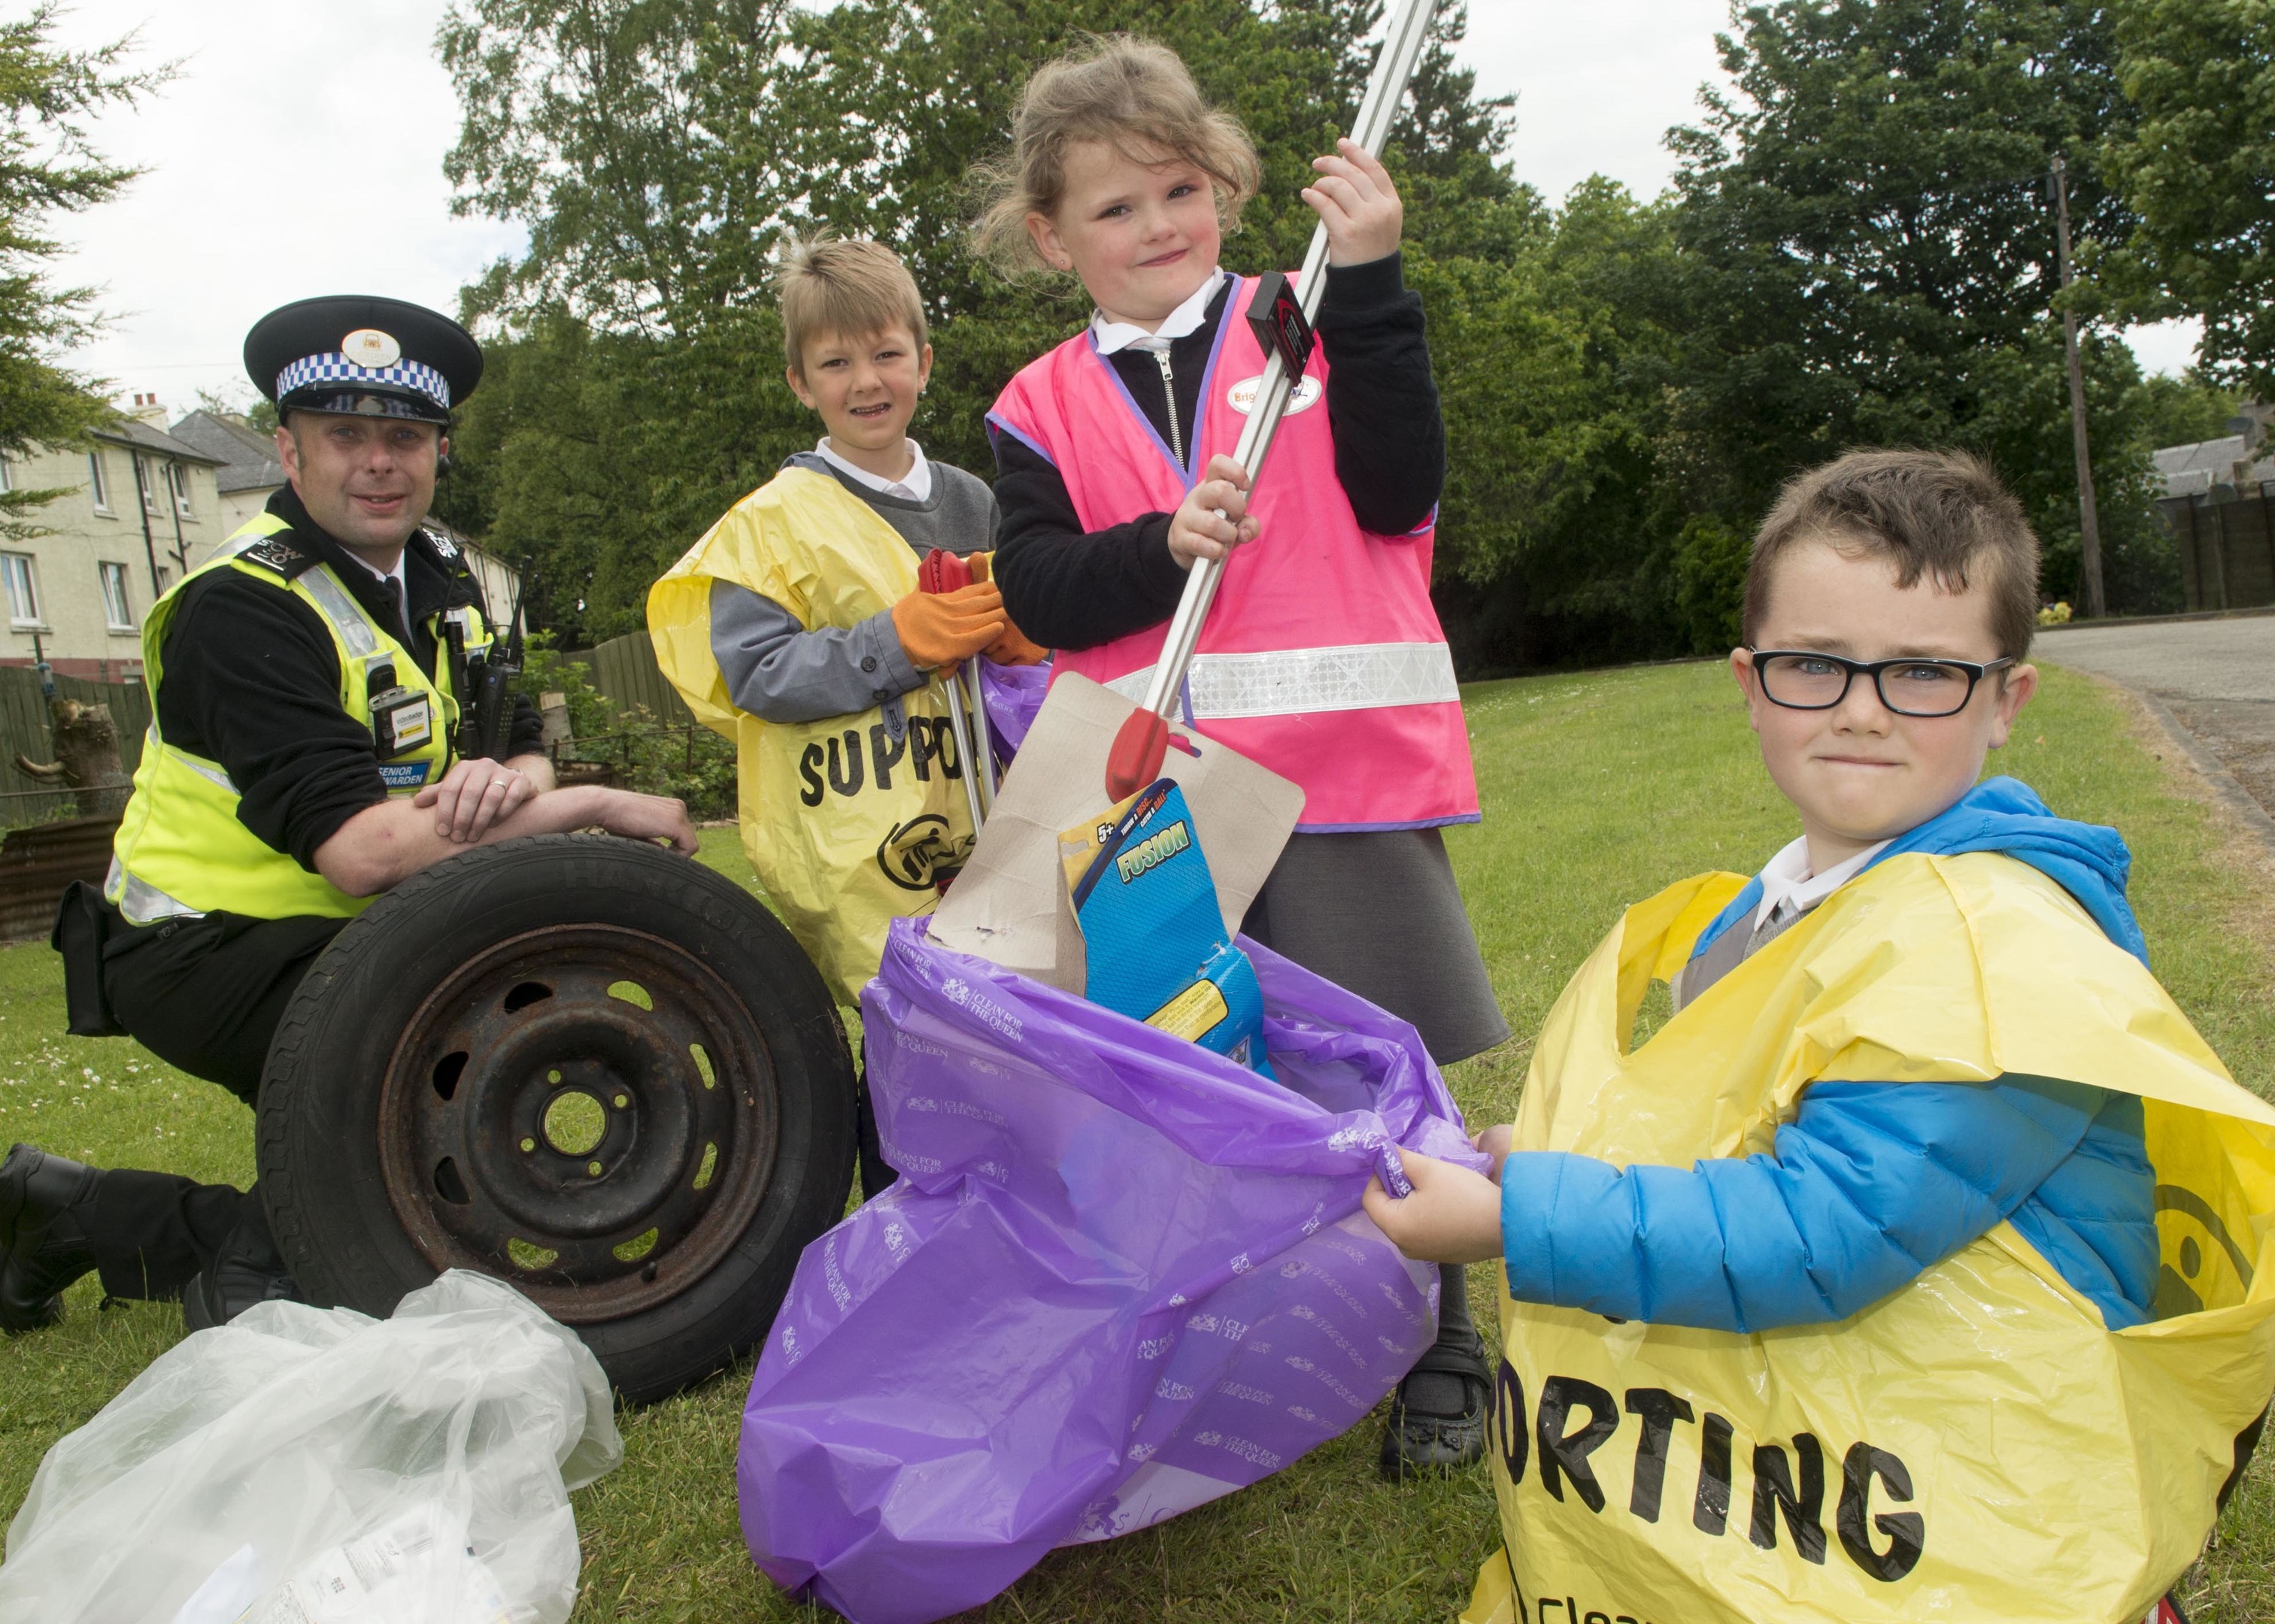 21/06/16 senior city warden Scott Mccall with, igor Grzybowski, megan McDonald, Josh Begg- Primary 1-

City wardens helped by local businesses helped pupils from WOODSIDE primary school clean up the area